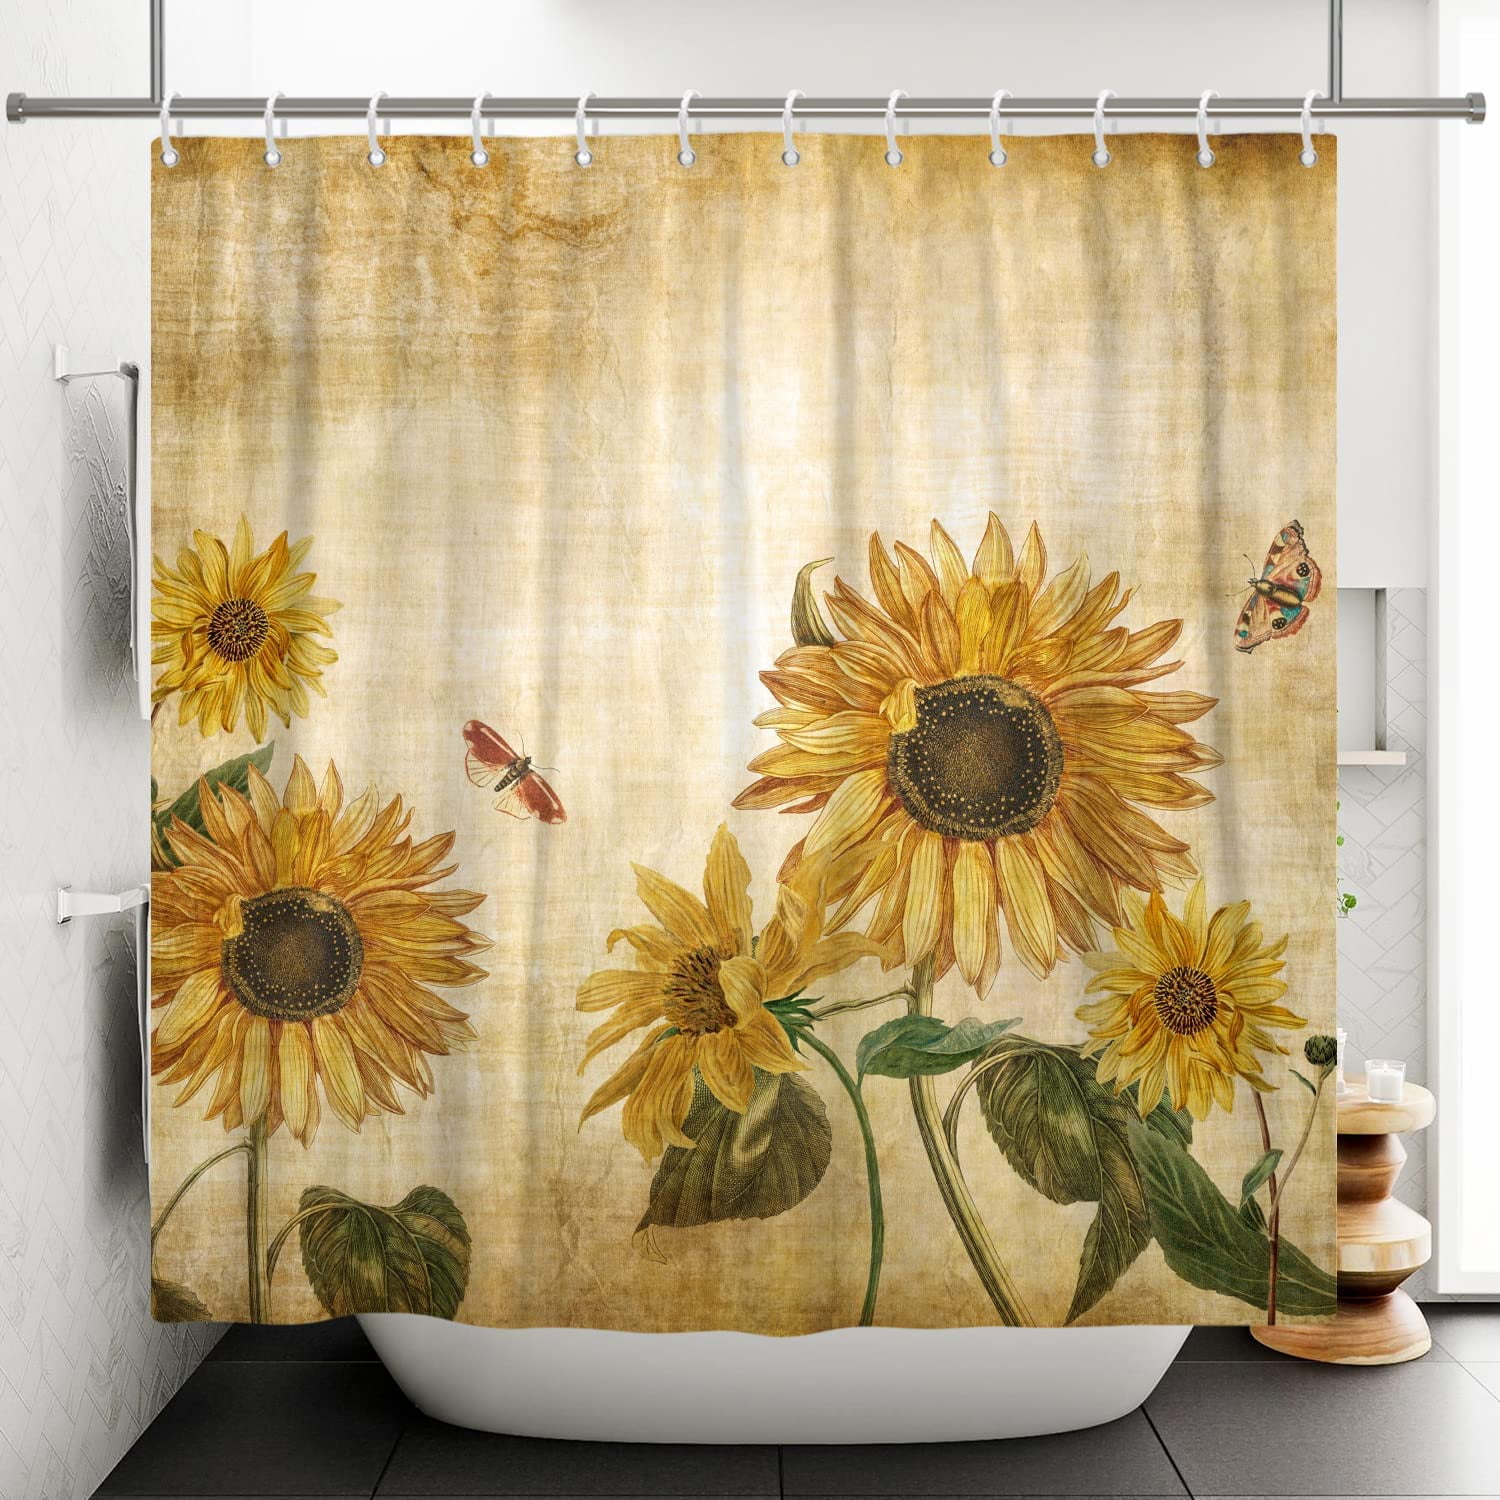 Rustic Planks Bee Gnomes Watercolor Sunflower Shower Curtain Set